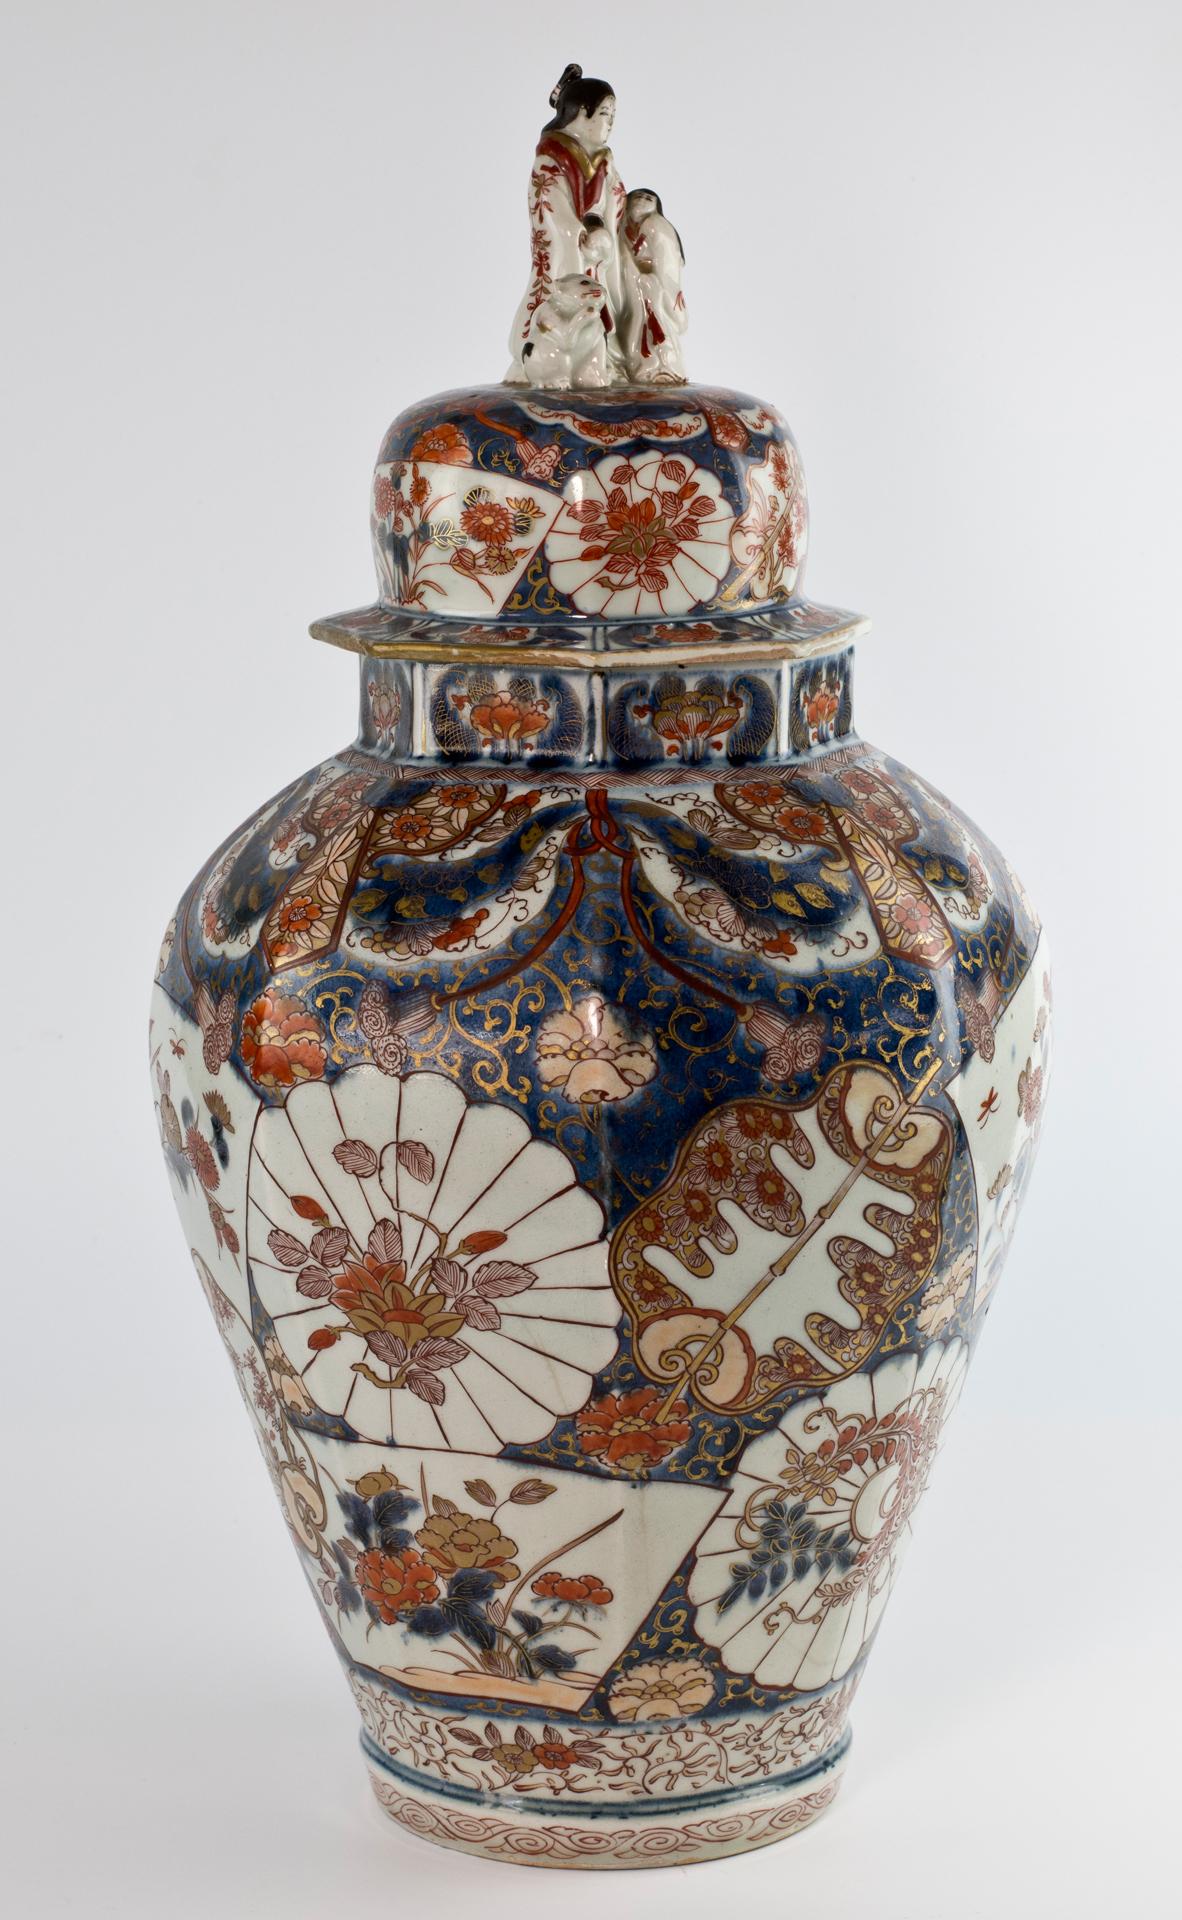 As part of our Japanese works of art collection we are delighted to offer this Edo Period 1612-1868, Arita vase and cover manufactured in the late 17th Century Genroku period 1688-1704, the vase of hexagonal form is finely painted in traditional